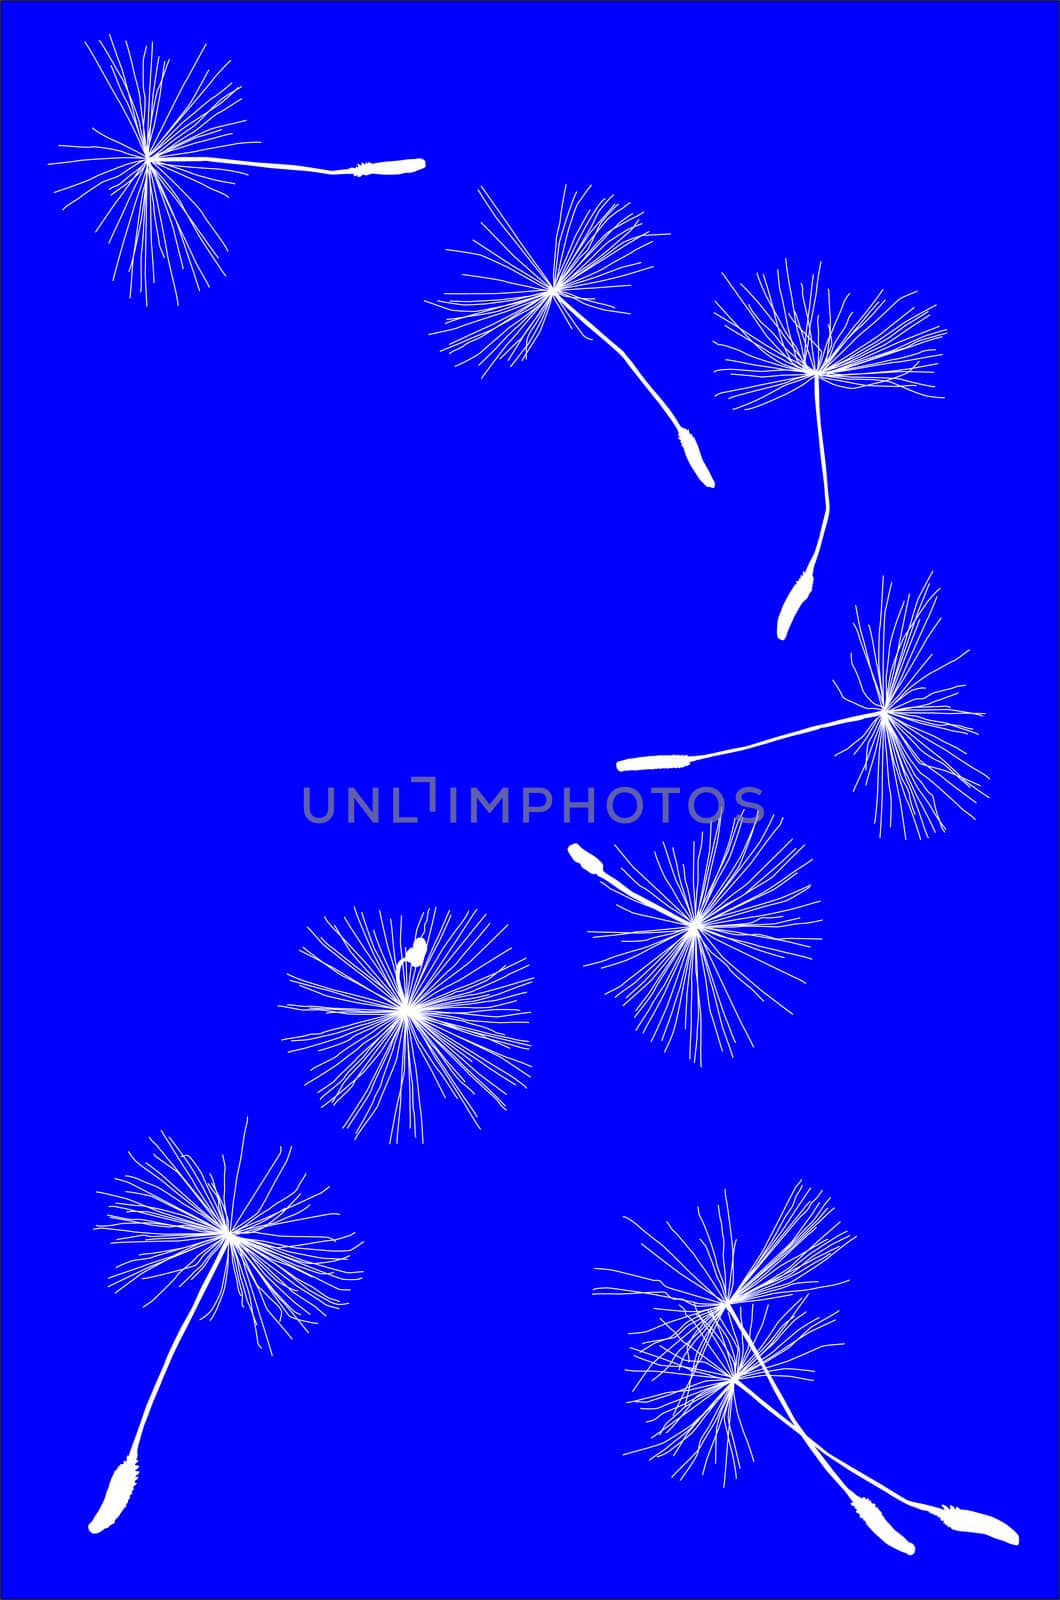 white dandelion, dandelion silhouette, silhouette of fluff, fly, seed, fluffy seeds, lugky down, blue background, the card vector, achene with a white forelock, a plant in June, a summer plant, weed, the elixir of life, a medicinal plant